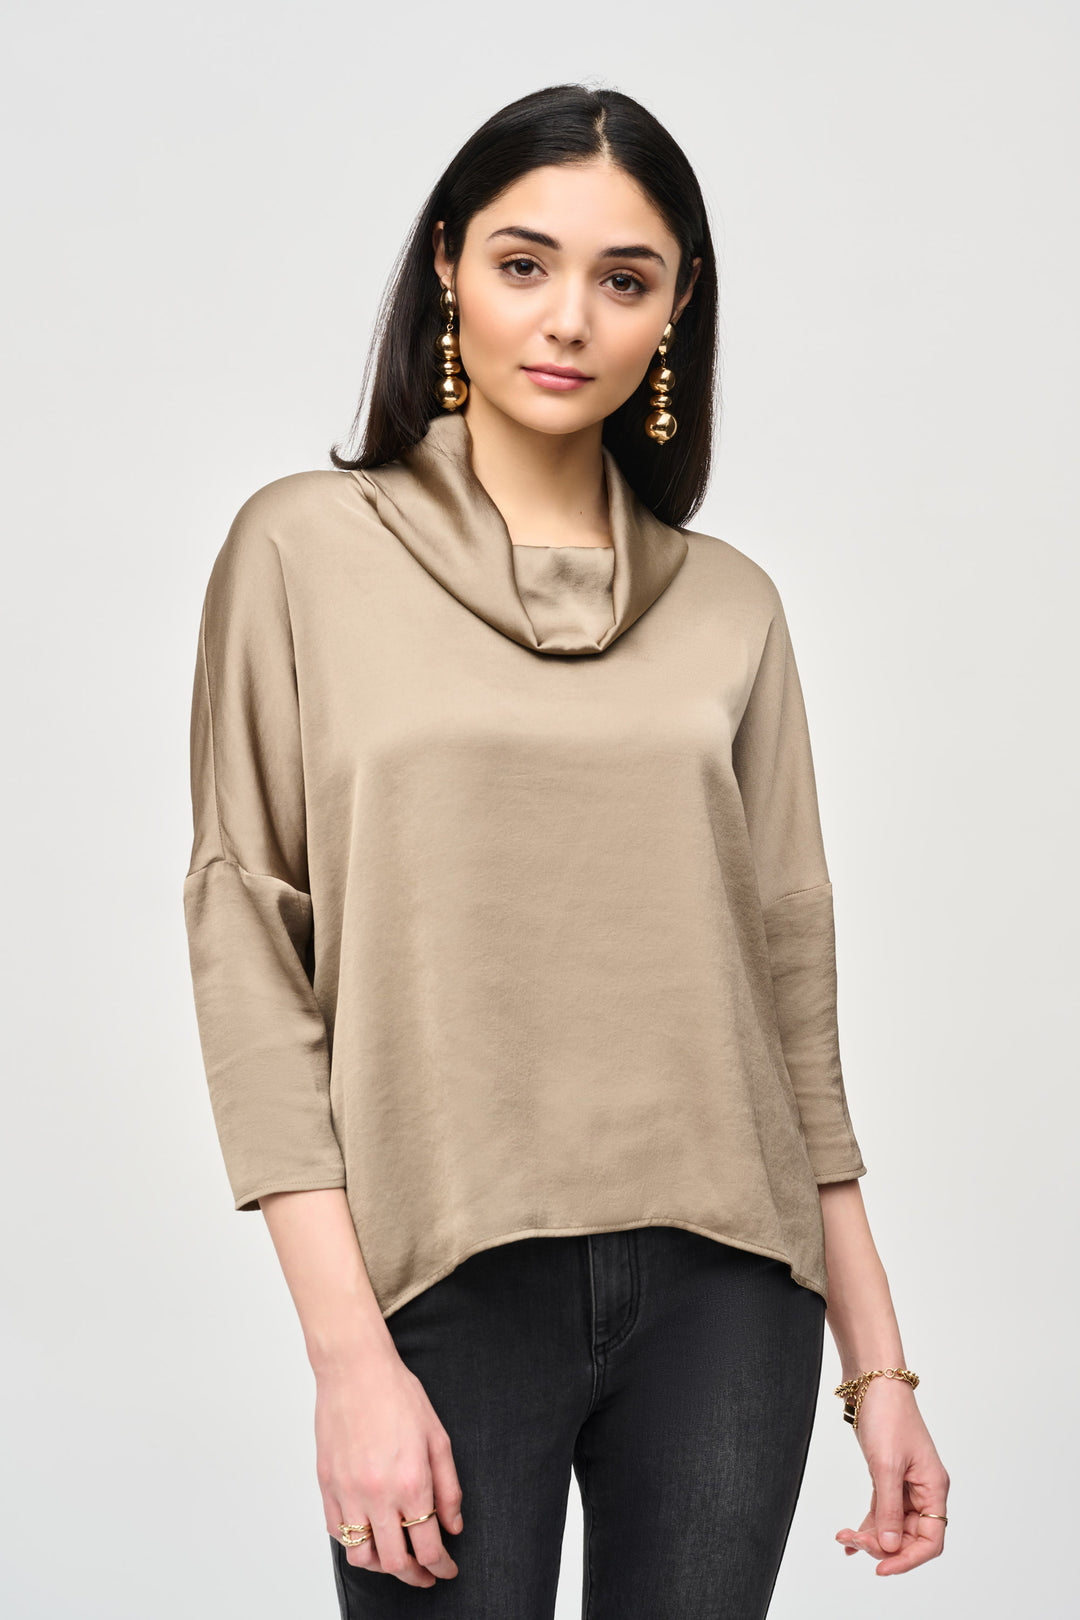 Joseph Ribkoff Fall 2024 This Satin Cowl Top from Joseph Ribkoff is the perfect choice for a sophisticated, stylish look.